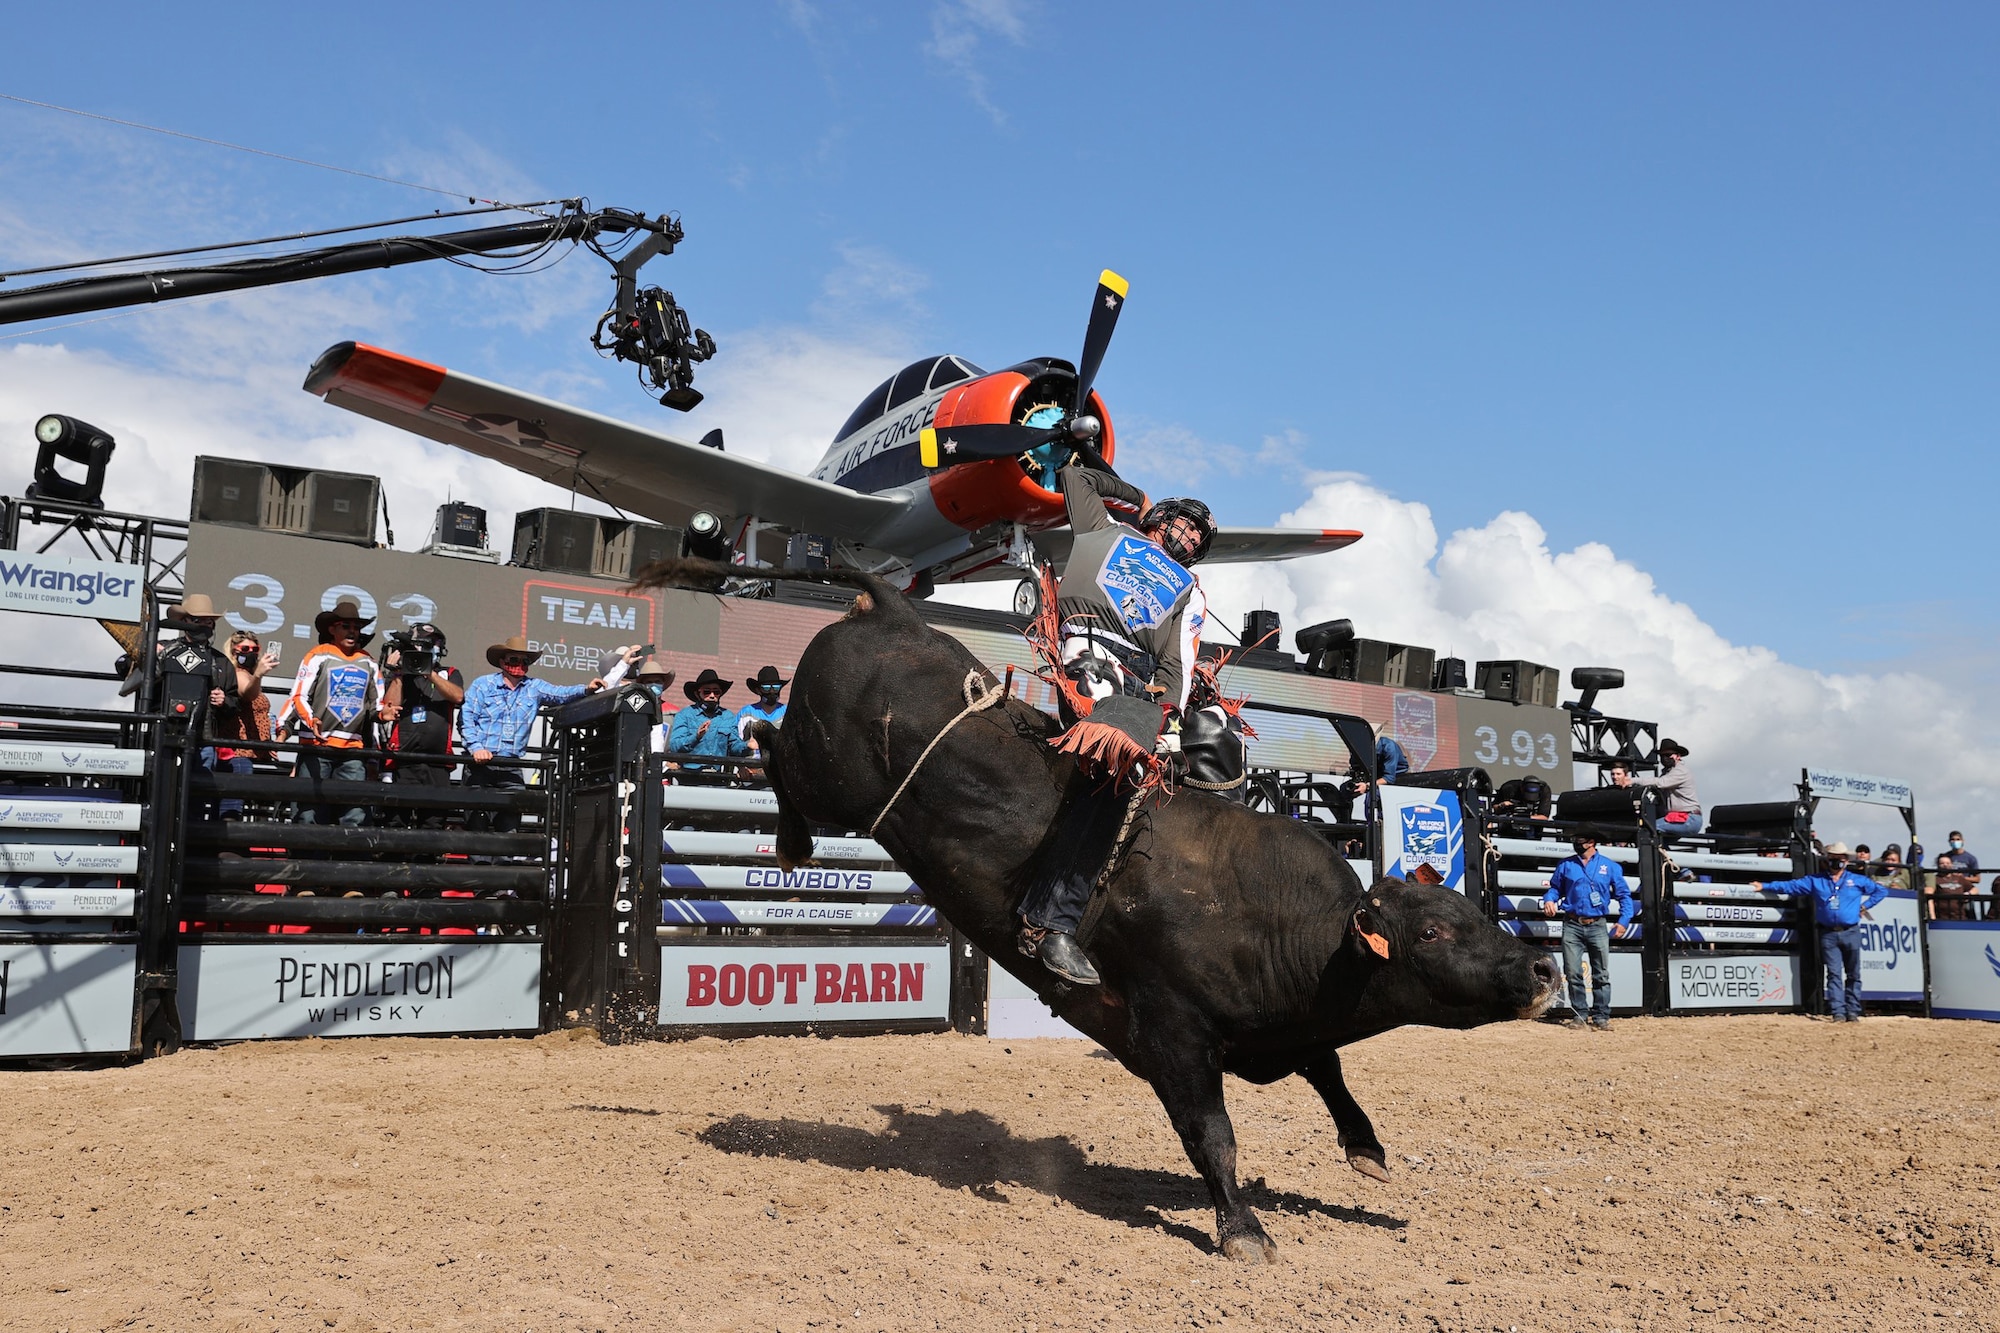 The Air Force Reserve and the Professional Bull Riders took part in a unique partnership Nov. 22, 2020.